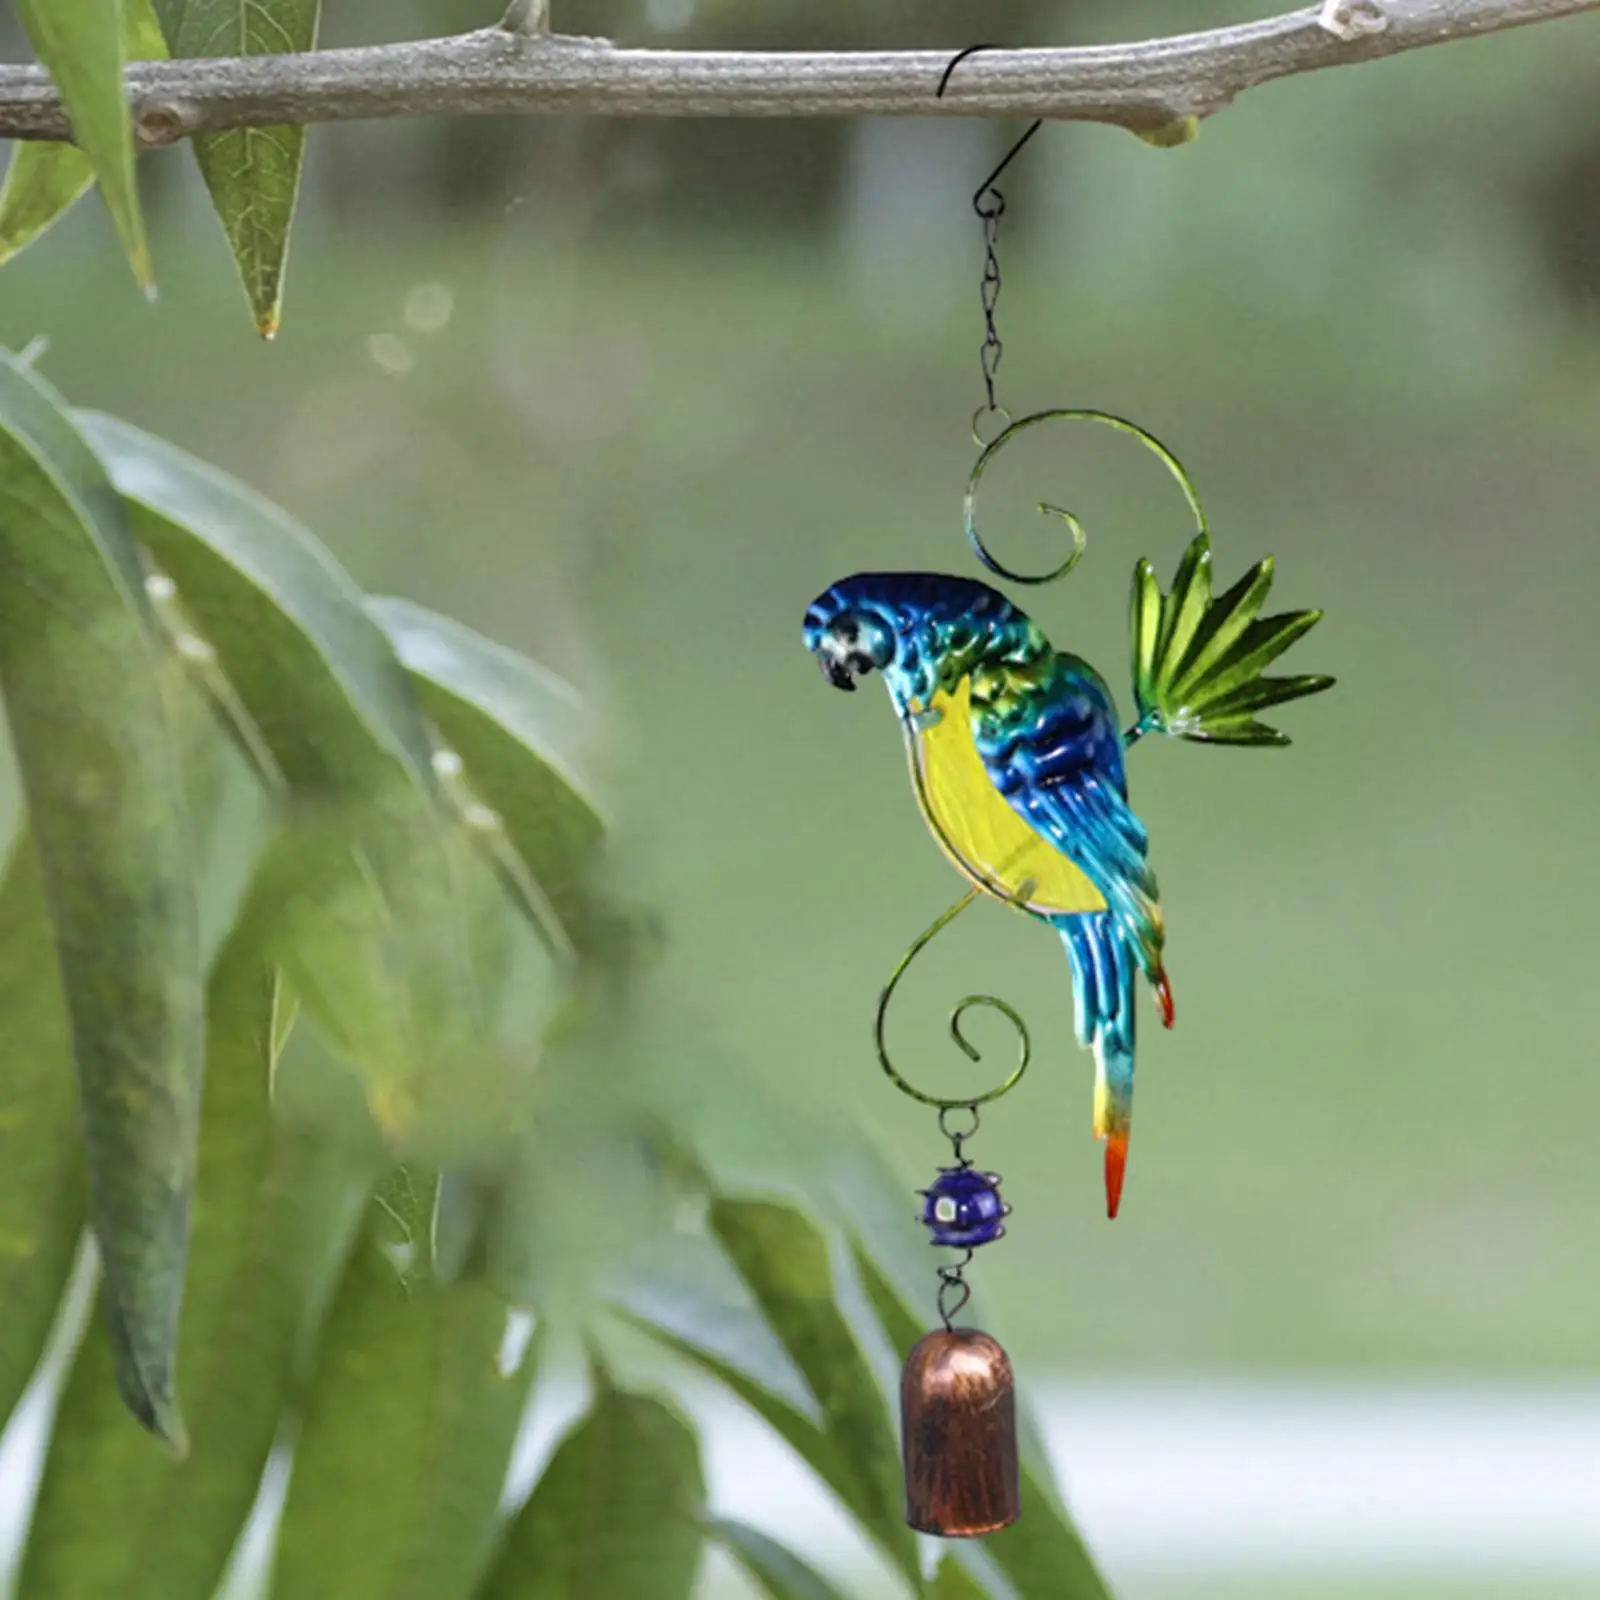 Parrot Wind Chime Home Ornament, Indoor And Outdoor Memorial Wind Chimes for Garden Patio Decoration Home Hanging Ornament